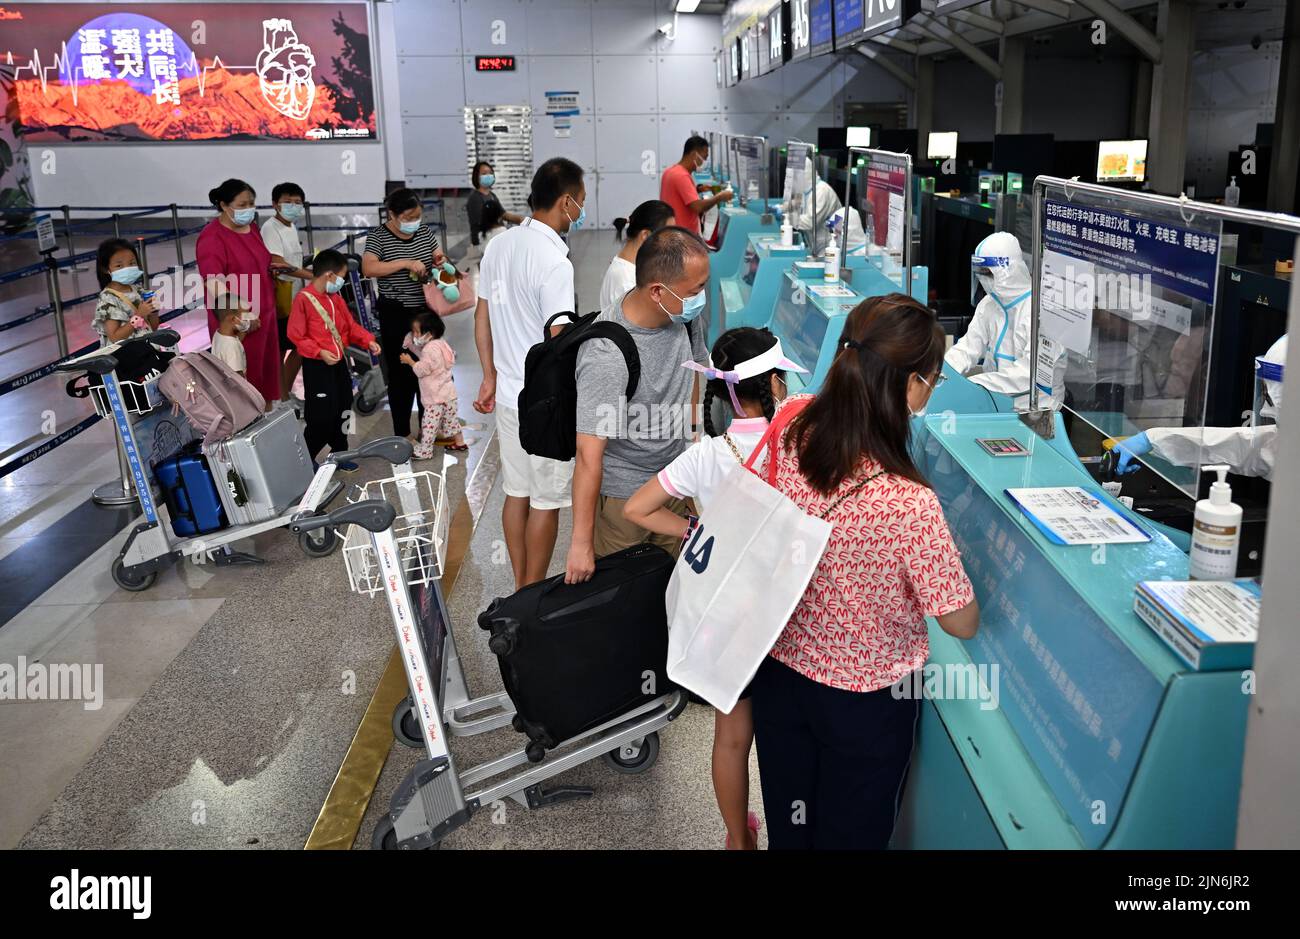 (220809) -- SANYA, Aug. 9, 2022 (Xinhua) -- Stranded tourists check in at Sanya Phoenix International Airport in Sanya, south China's Hainan Province, Aug. 9, 2022.  The first batch of 125 tourists stranded in Sanya due to the latest COVID-19 resurgence have flown to Xi'an on Tuesday.   Hainan authorities have taken measures to arrange return trips for stranded tourists who meet specific epidemic control requirements. (Xinhua/Guo Cheng) Stock Photo